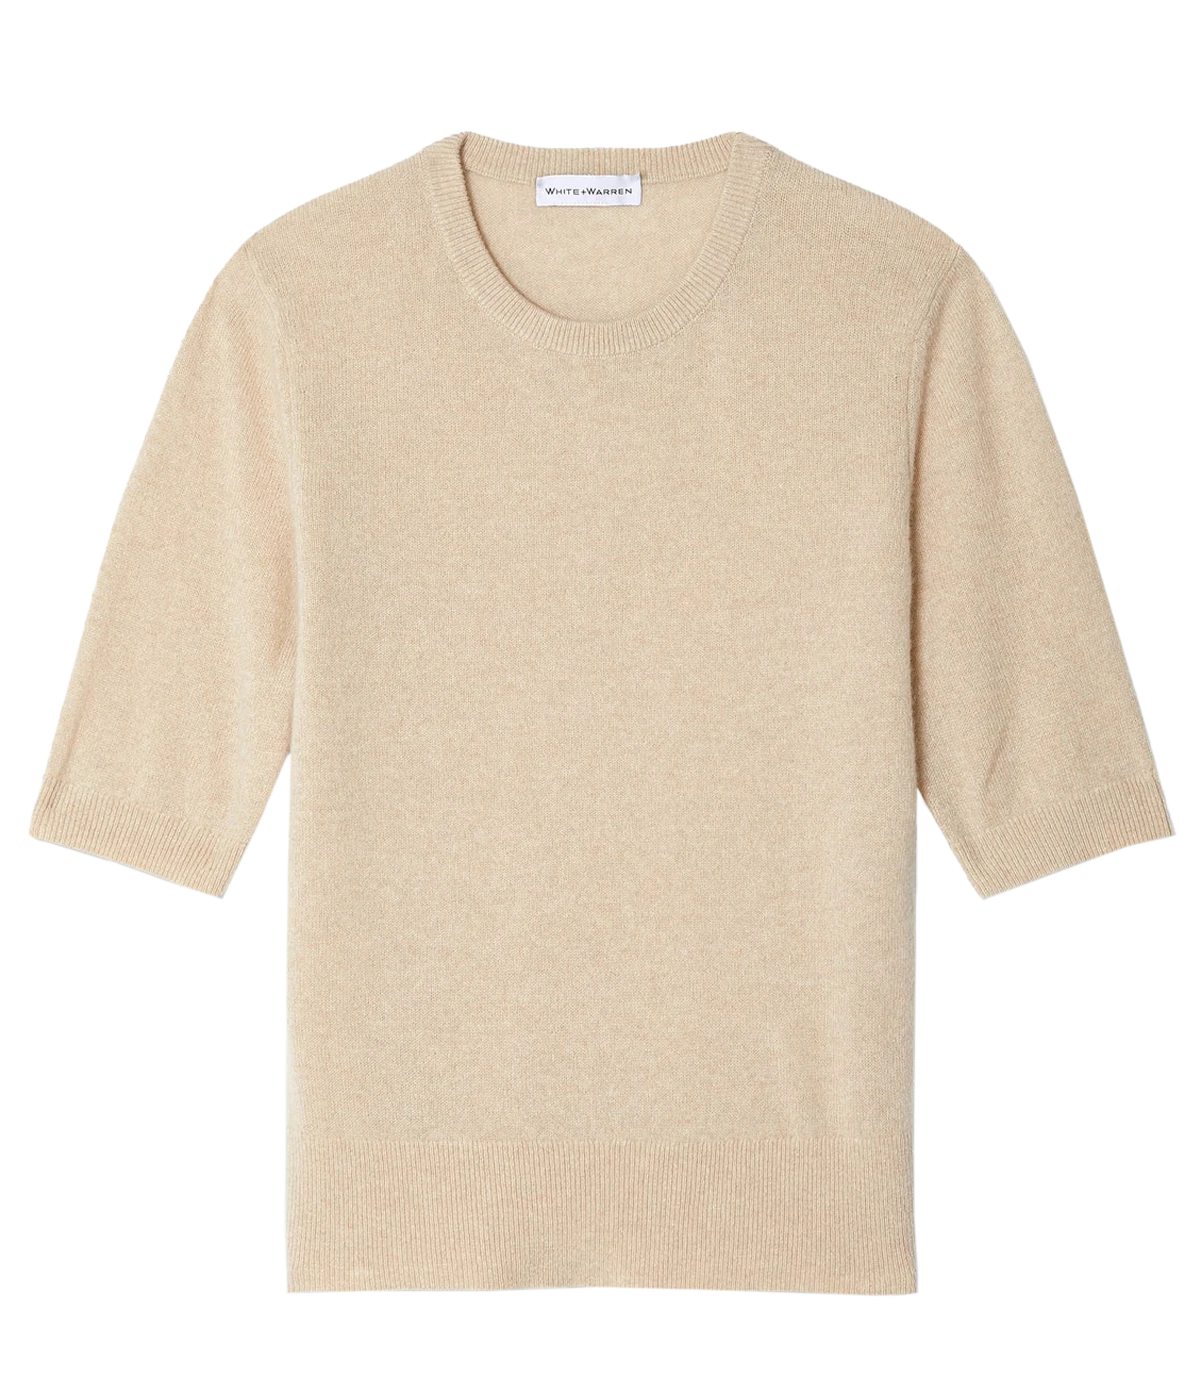 Cashmere Elbow Sleeve Tee in Sand Heather